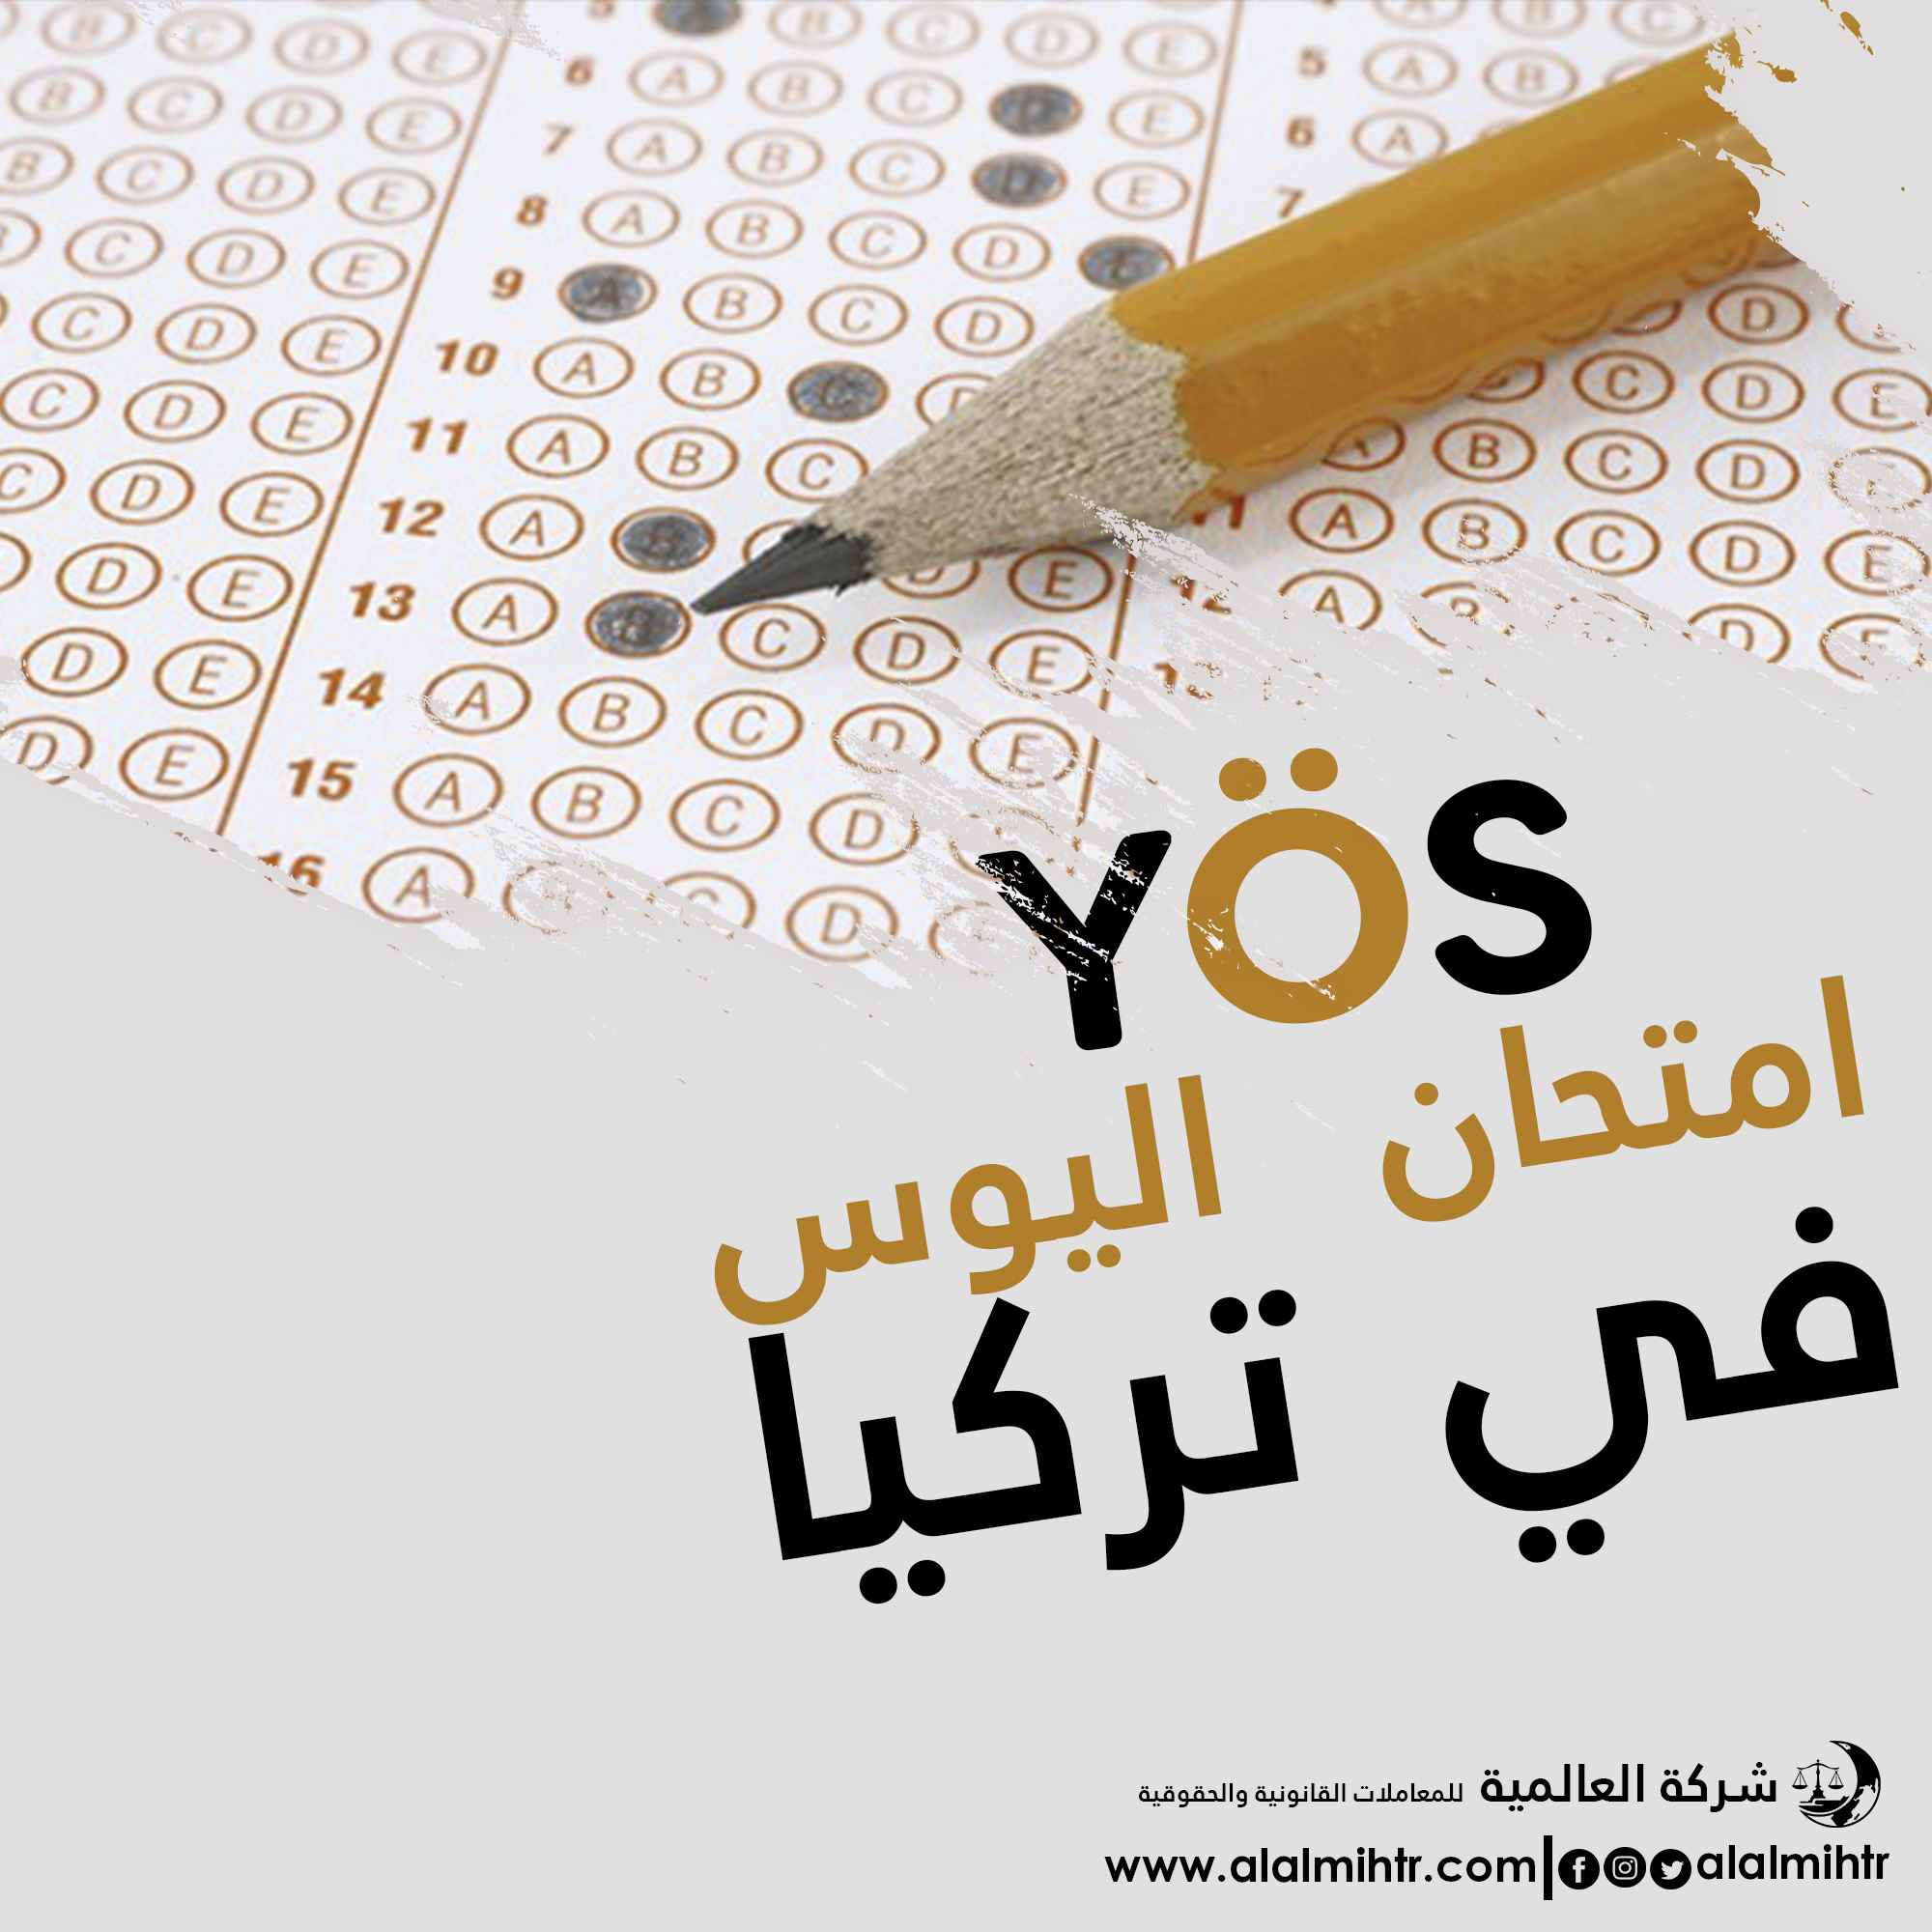 You are currently viewing امتحان “اليوس” (yös) في تركيا